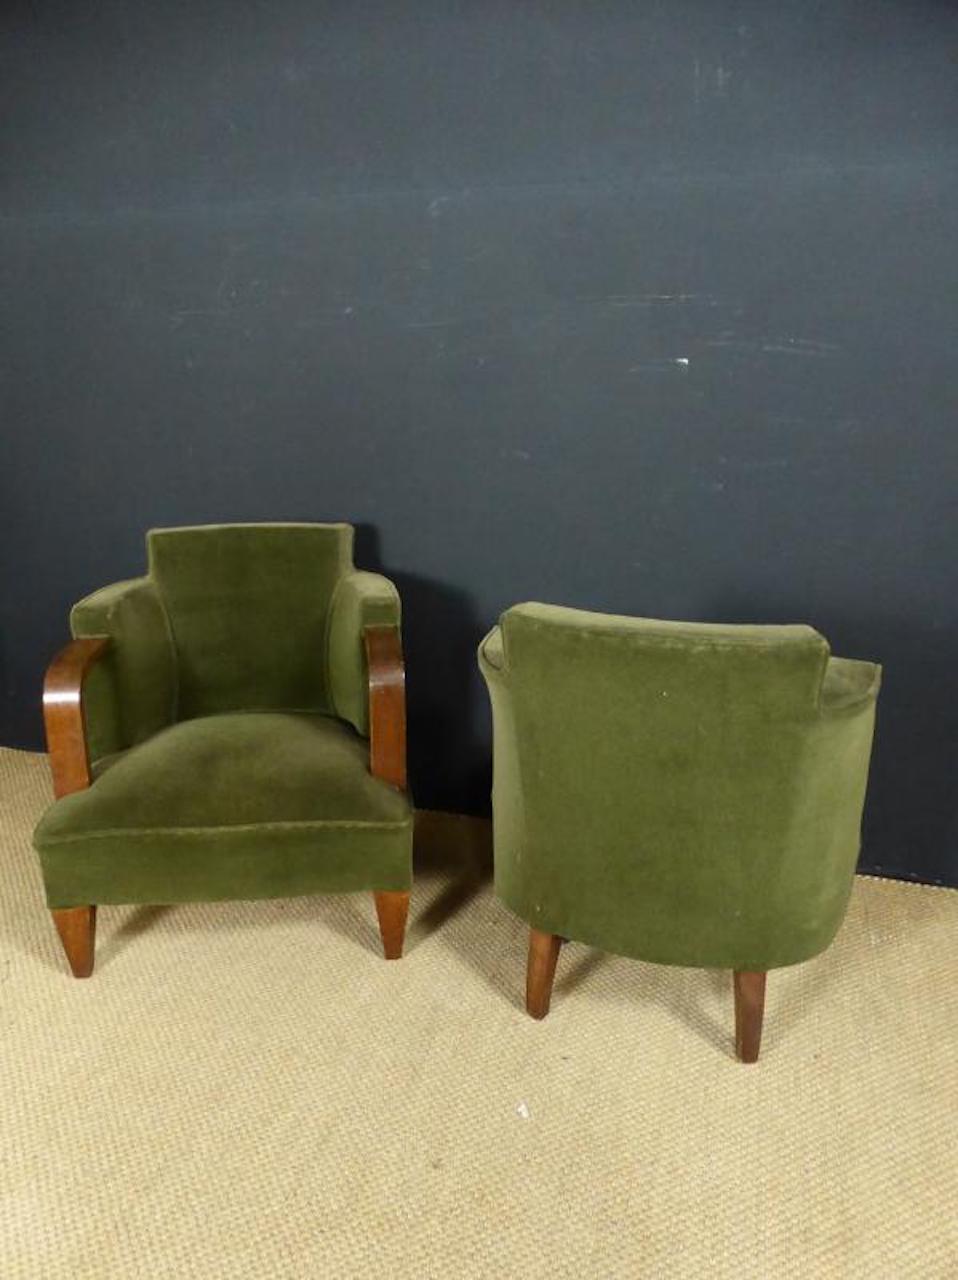 Very nice 20th century French Art Deco armchair pair from the 1930s.
Original green velvet fabric. Stained beech armrests.
Typical Art Deco shape.
Made in the original way of upholstering. The seating is made with resilience.
This nice Art Deco